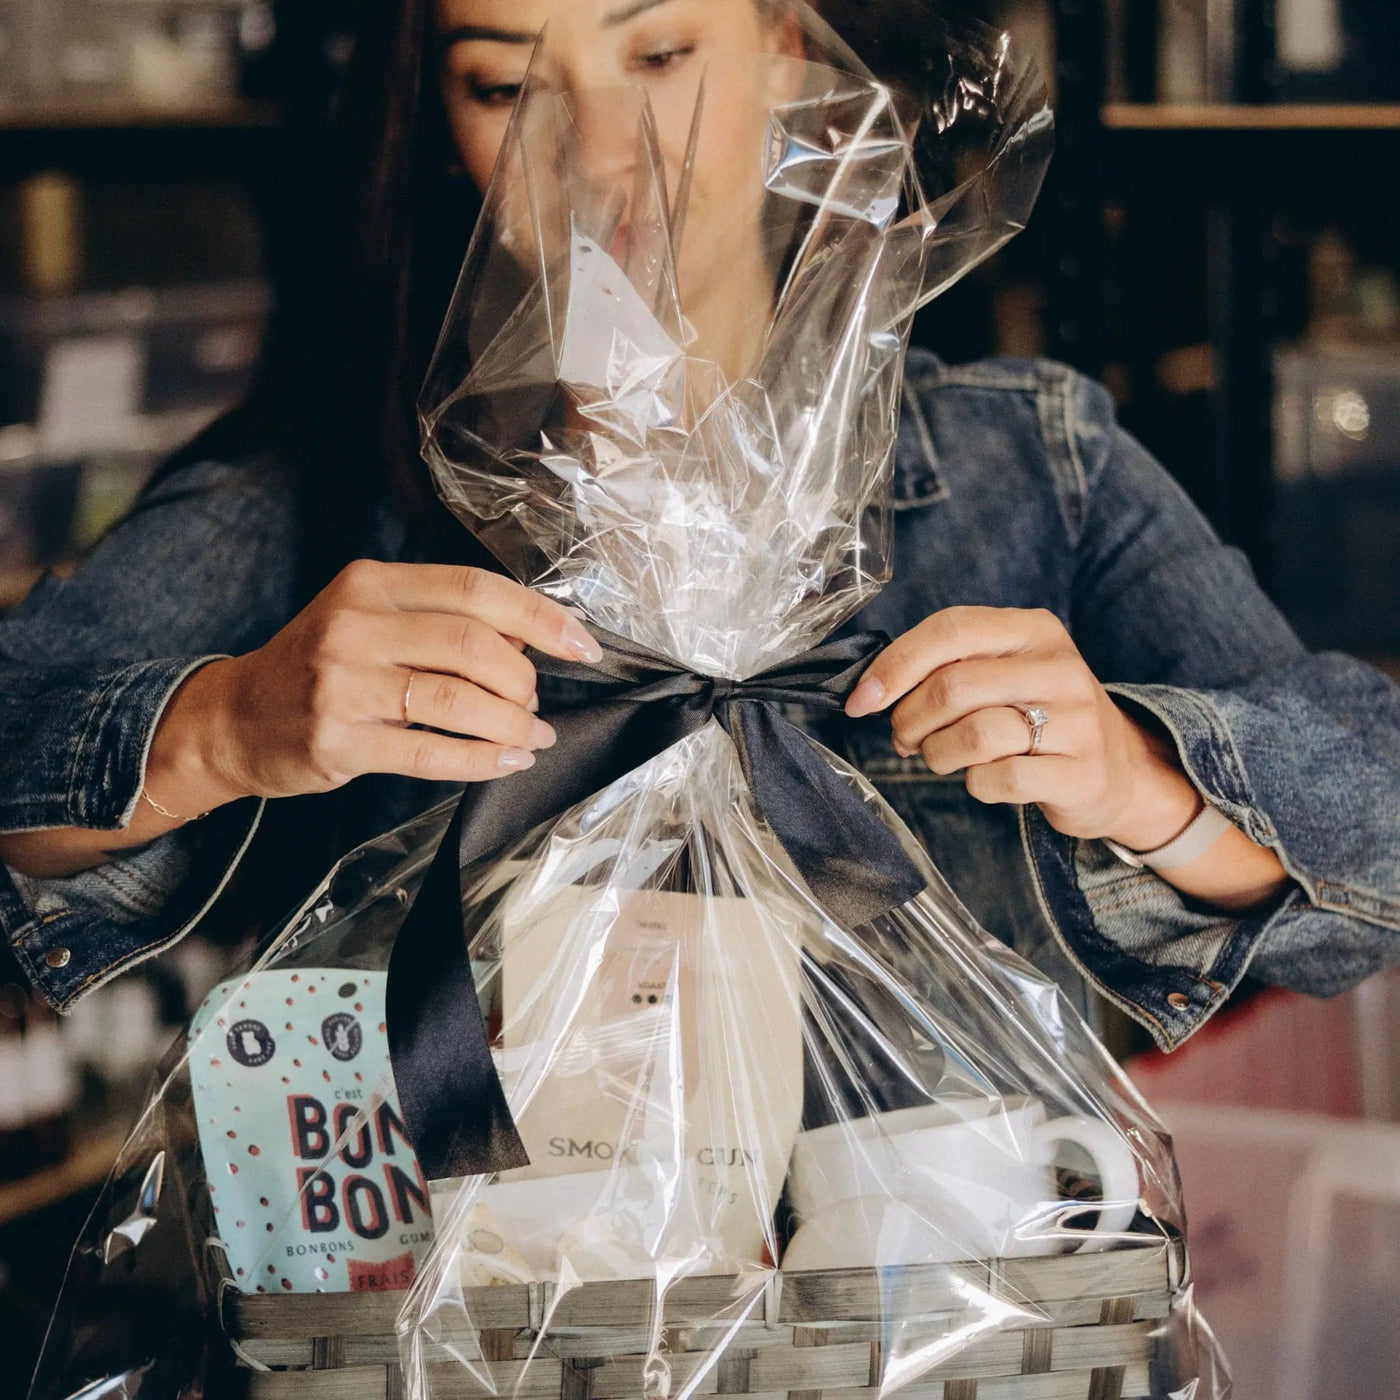 In Store Grab & Go Gifts - The Local Space